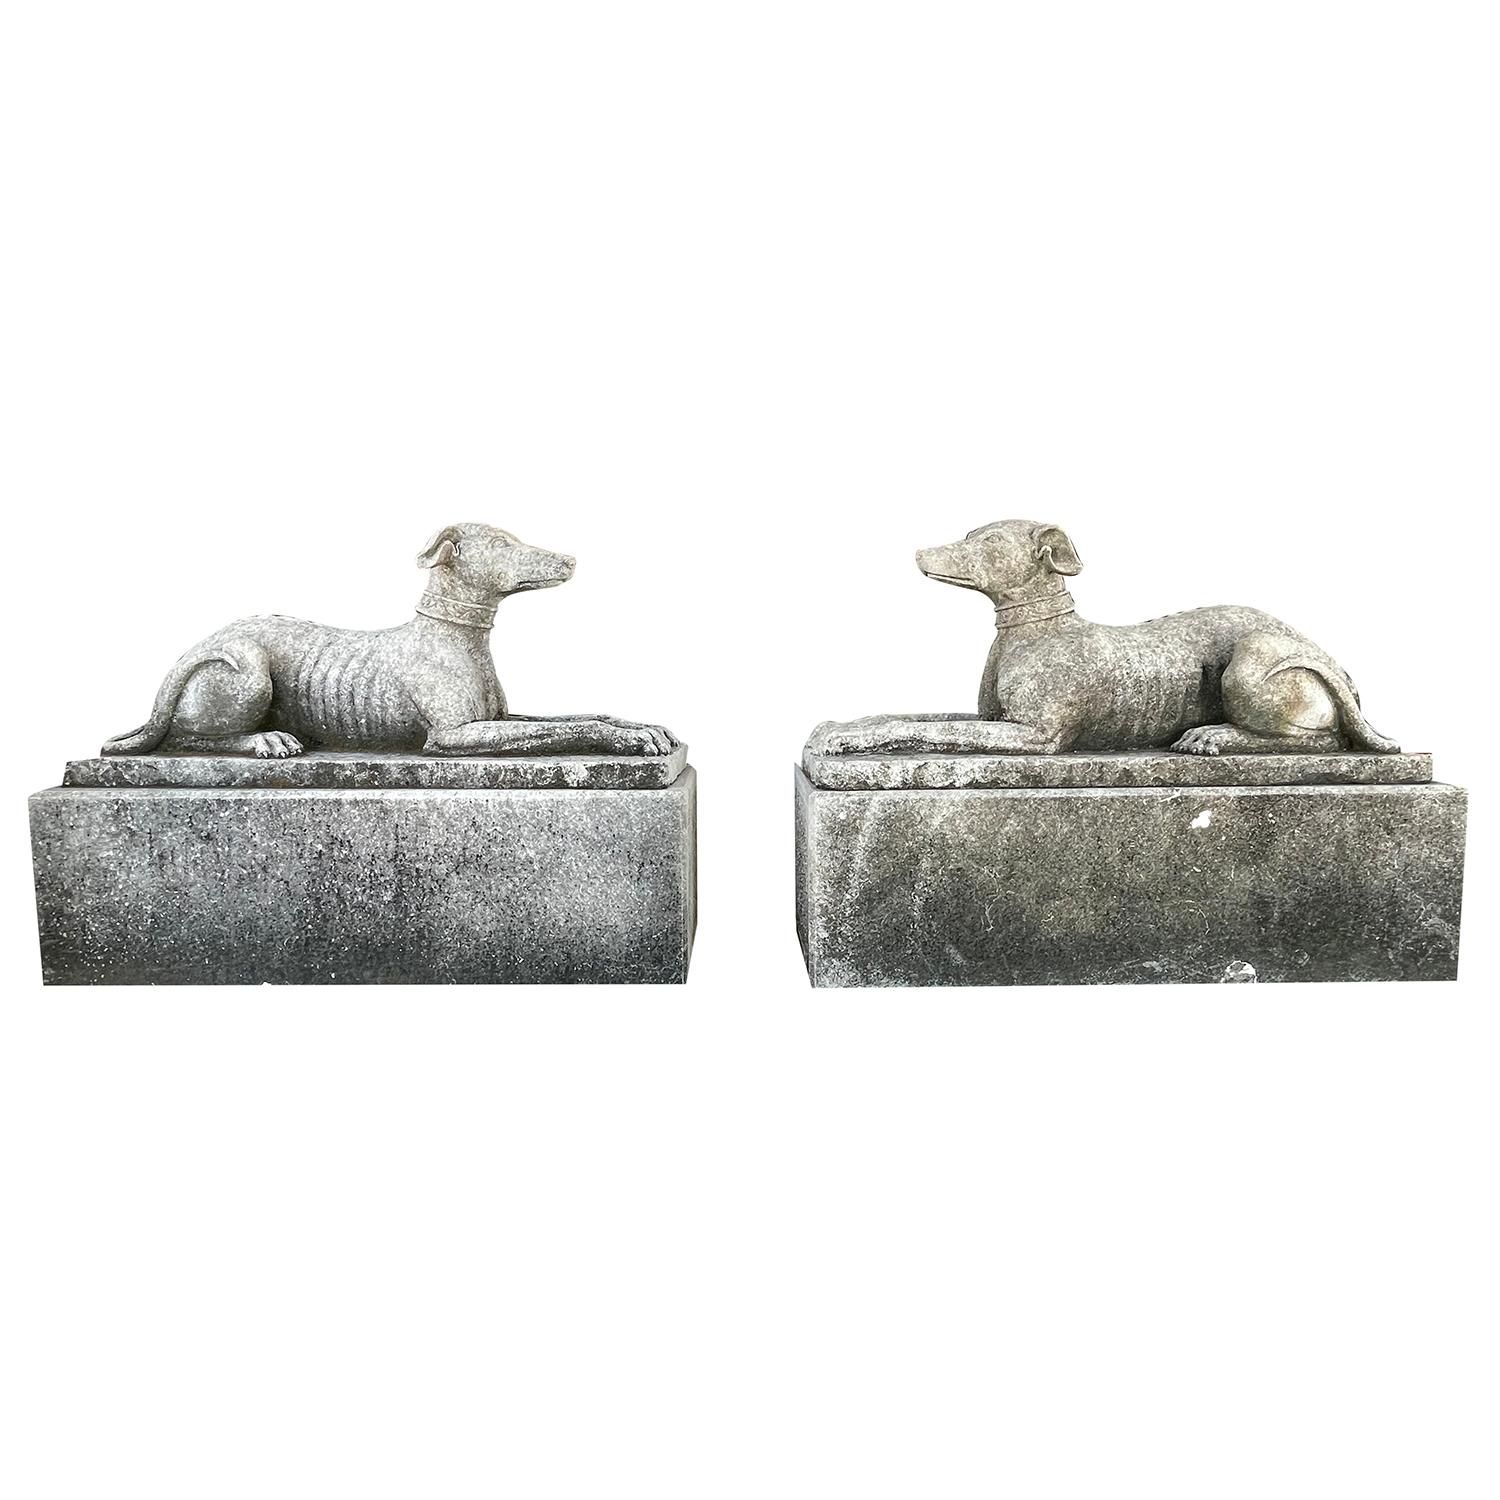 English 20th Century British Vintage Pair of Whippet Garden Limestone Statues For Sale